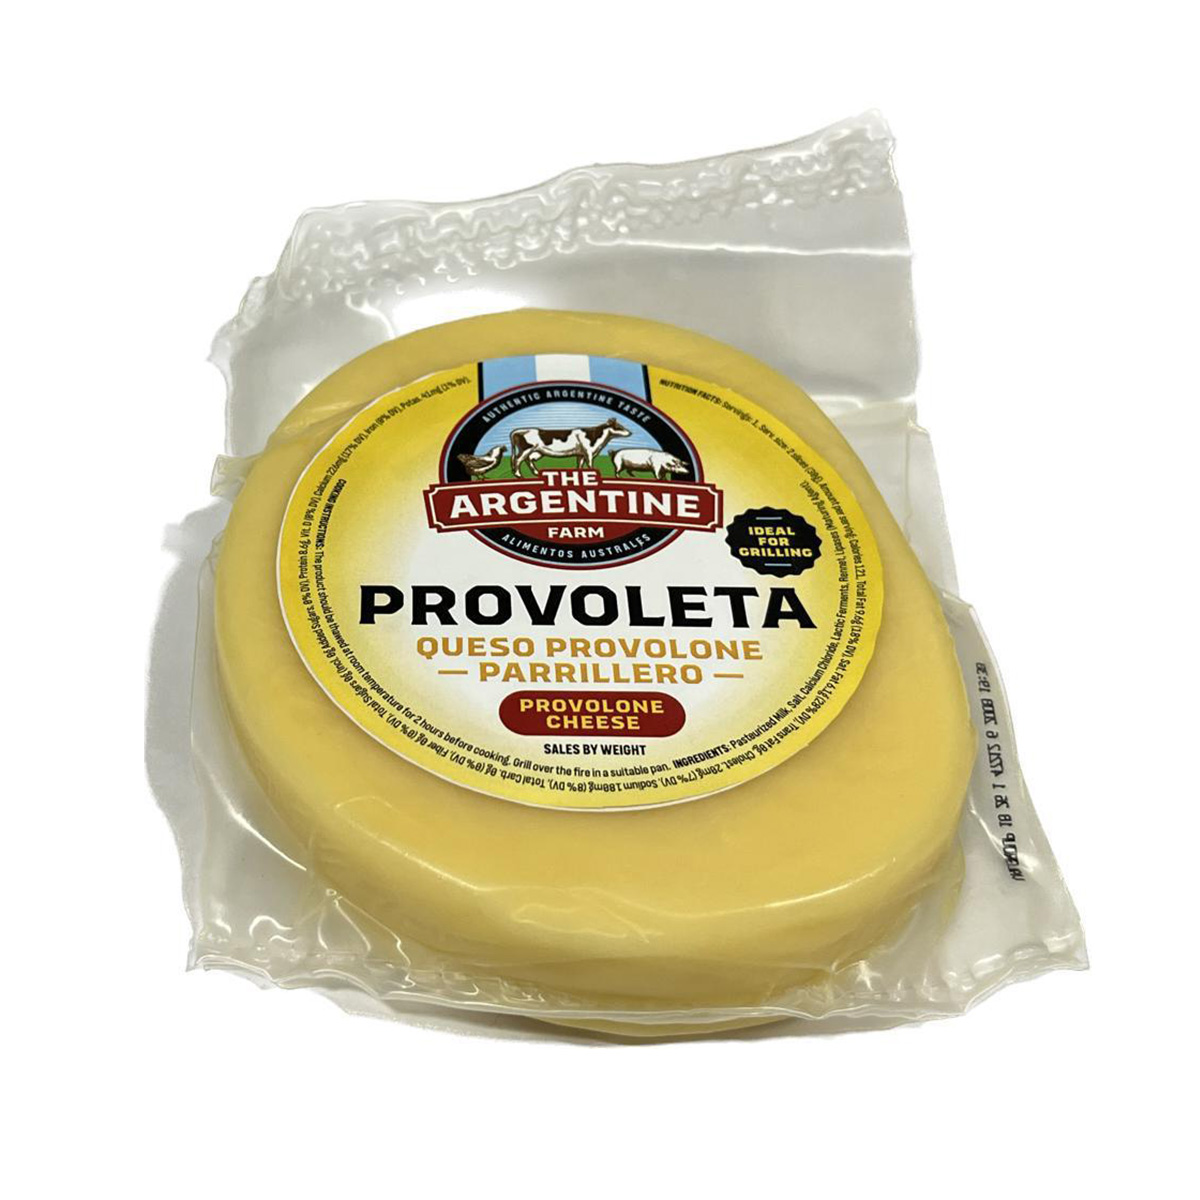 Barbecue Provolone Australes x | Cheese Alimentos Farm oz. The 8.11 42 Argentine